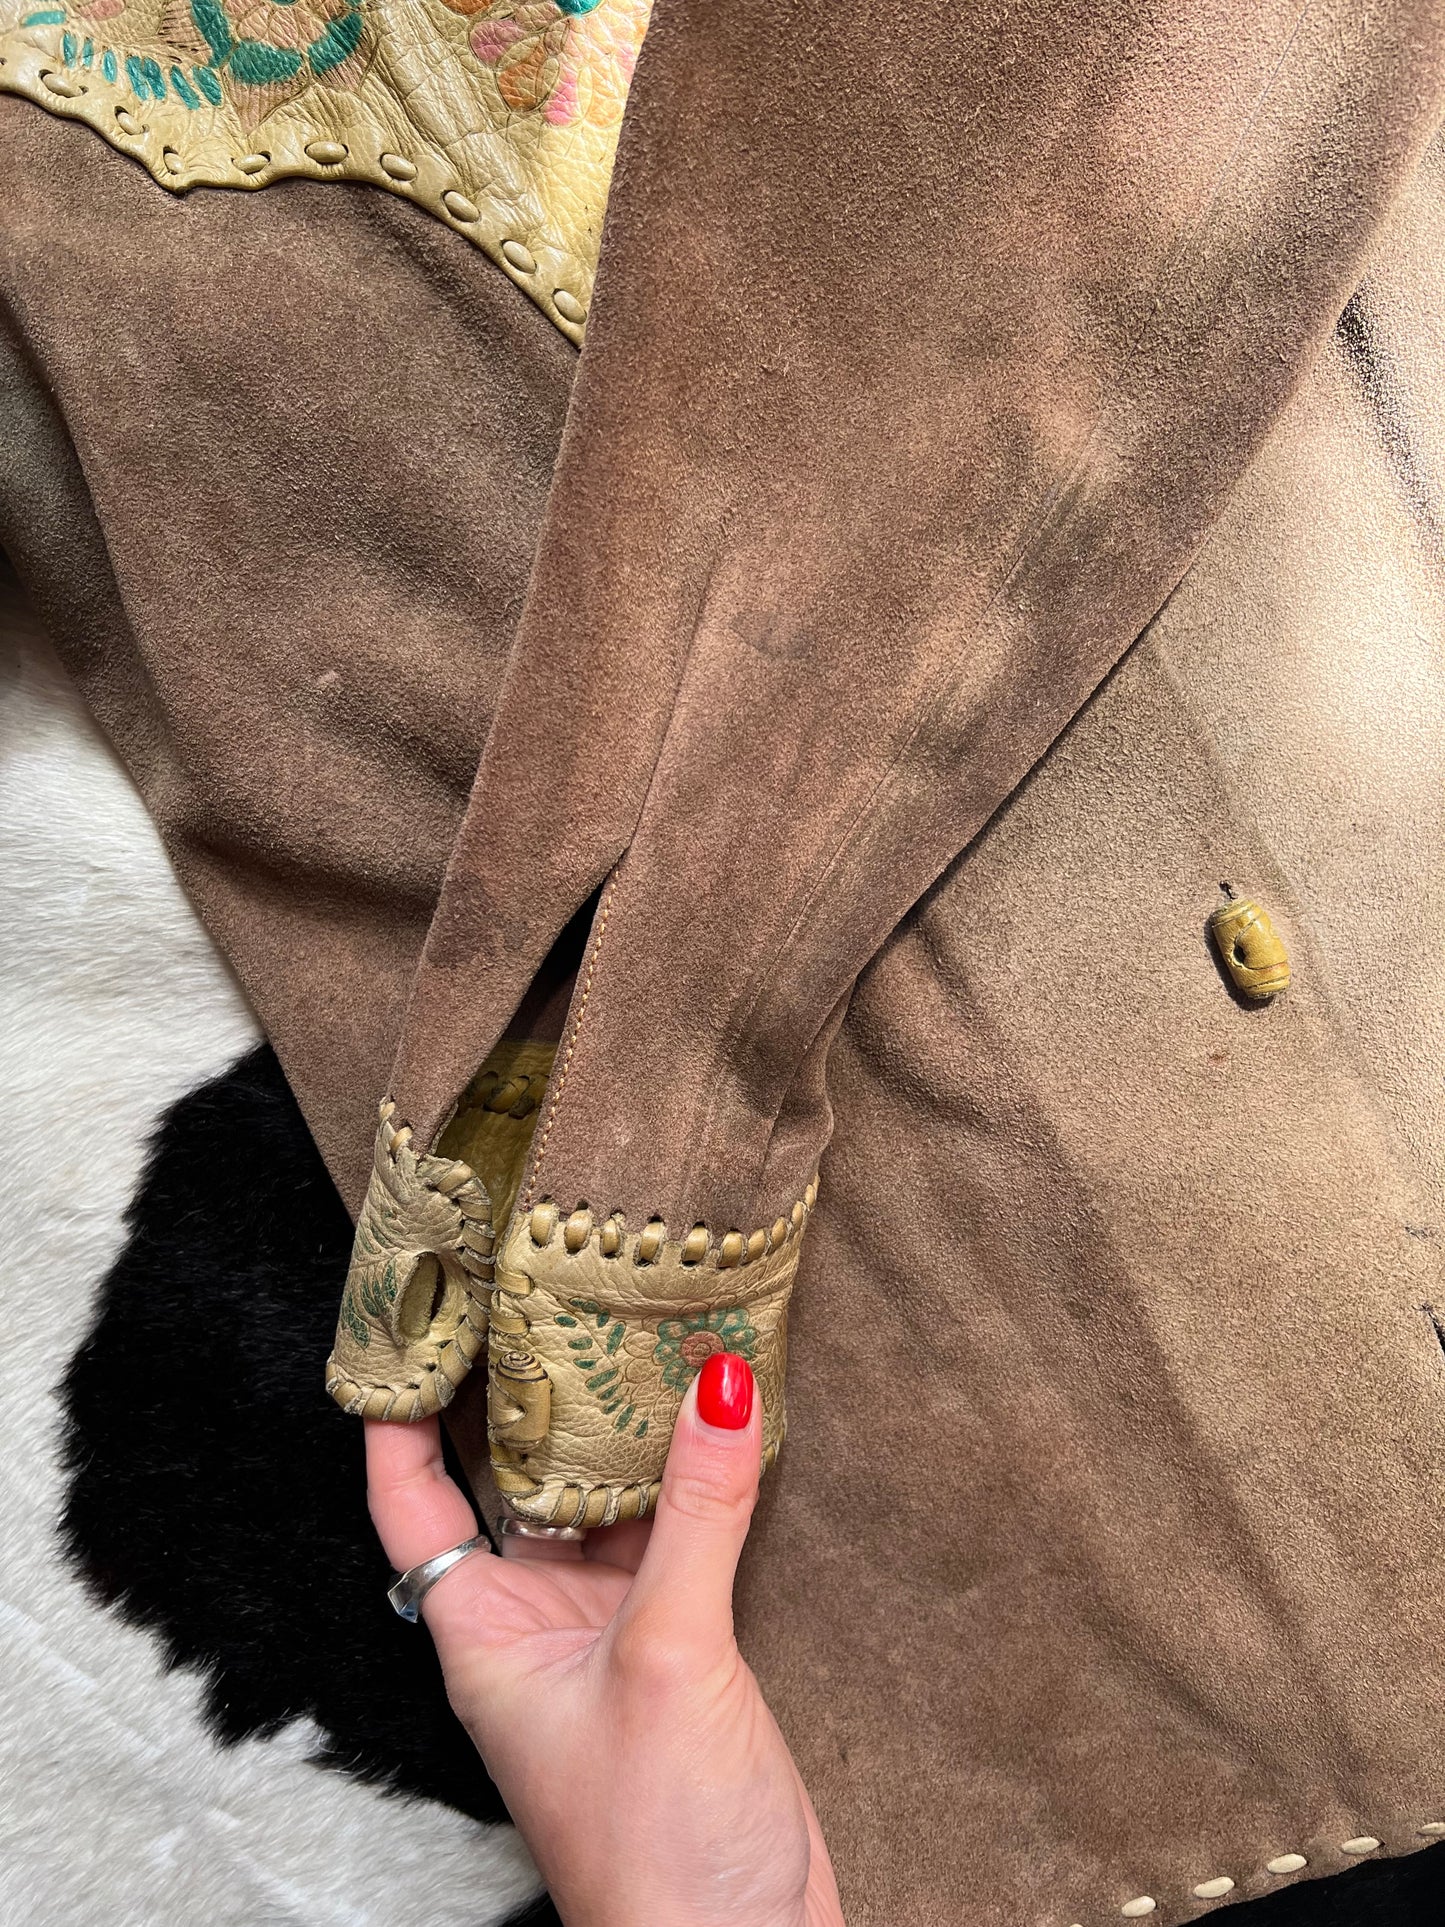 Rare 1970s CHAR suede jacket